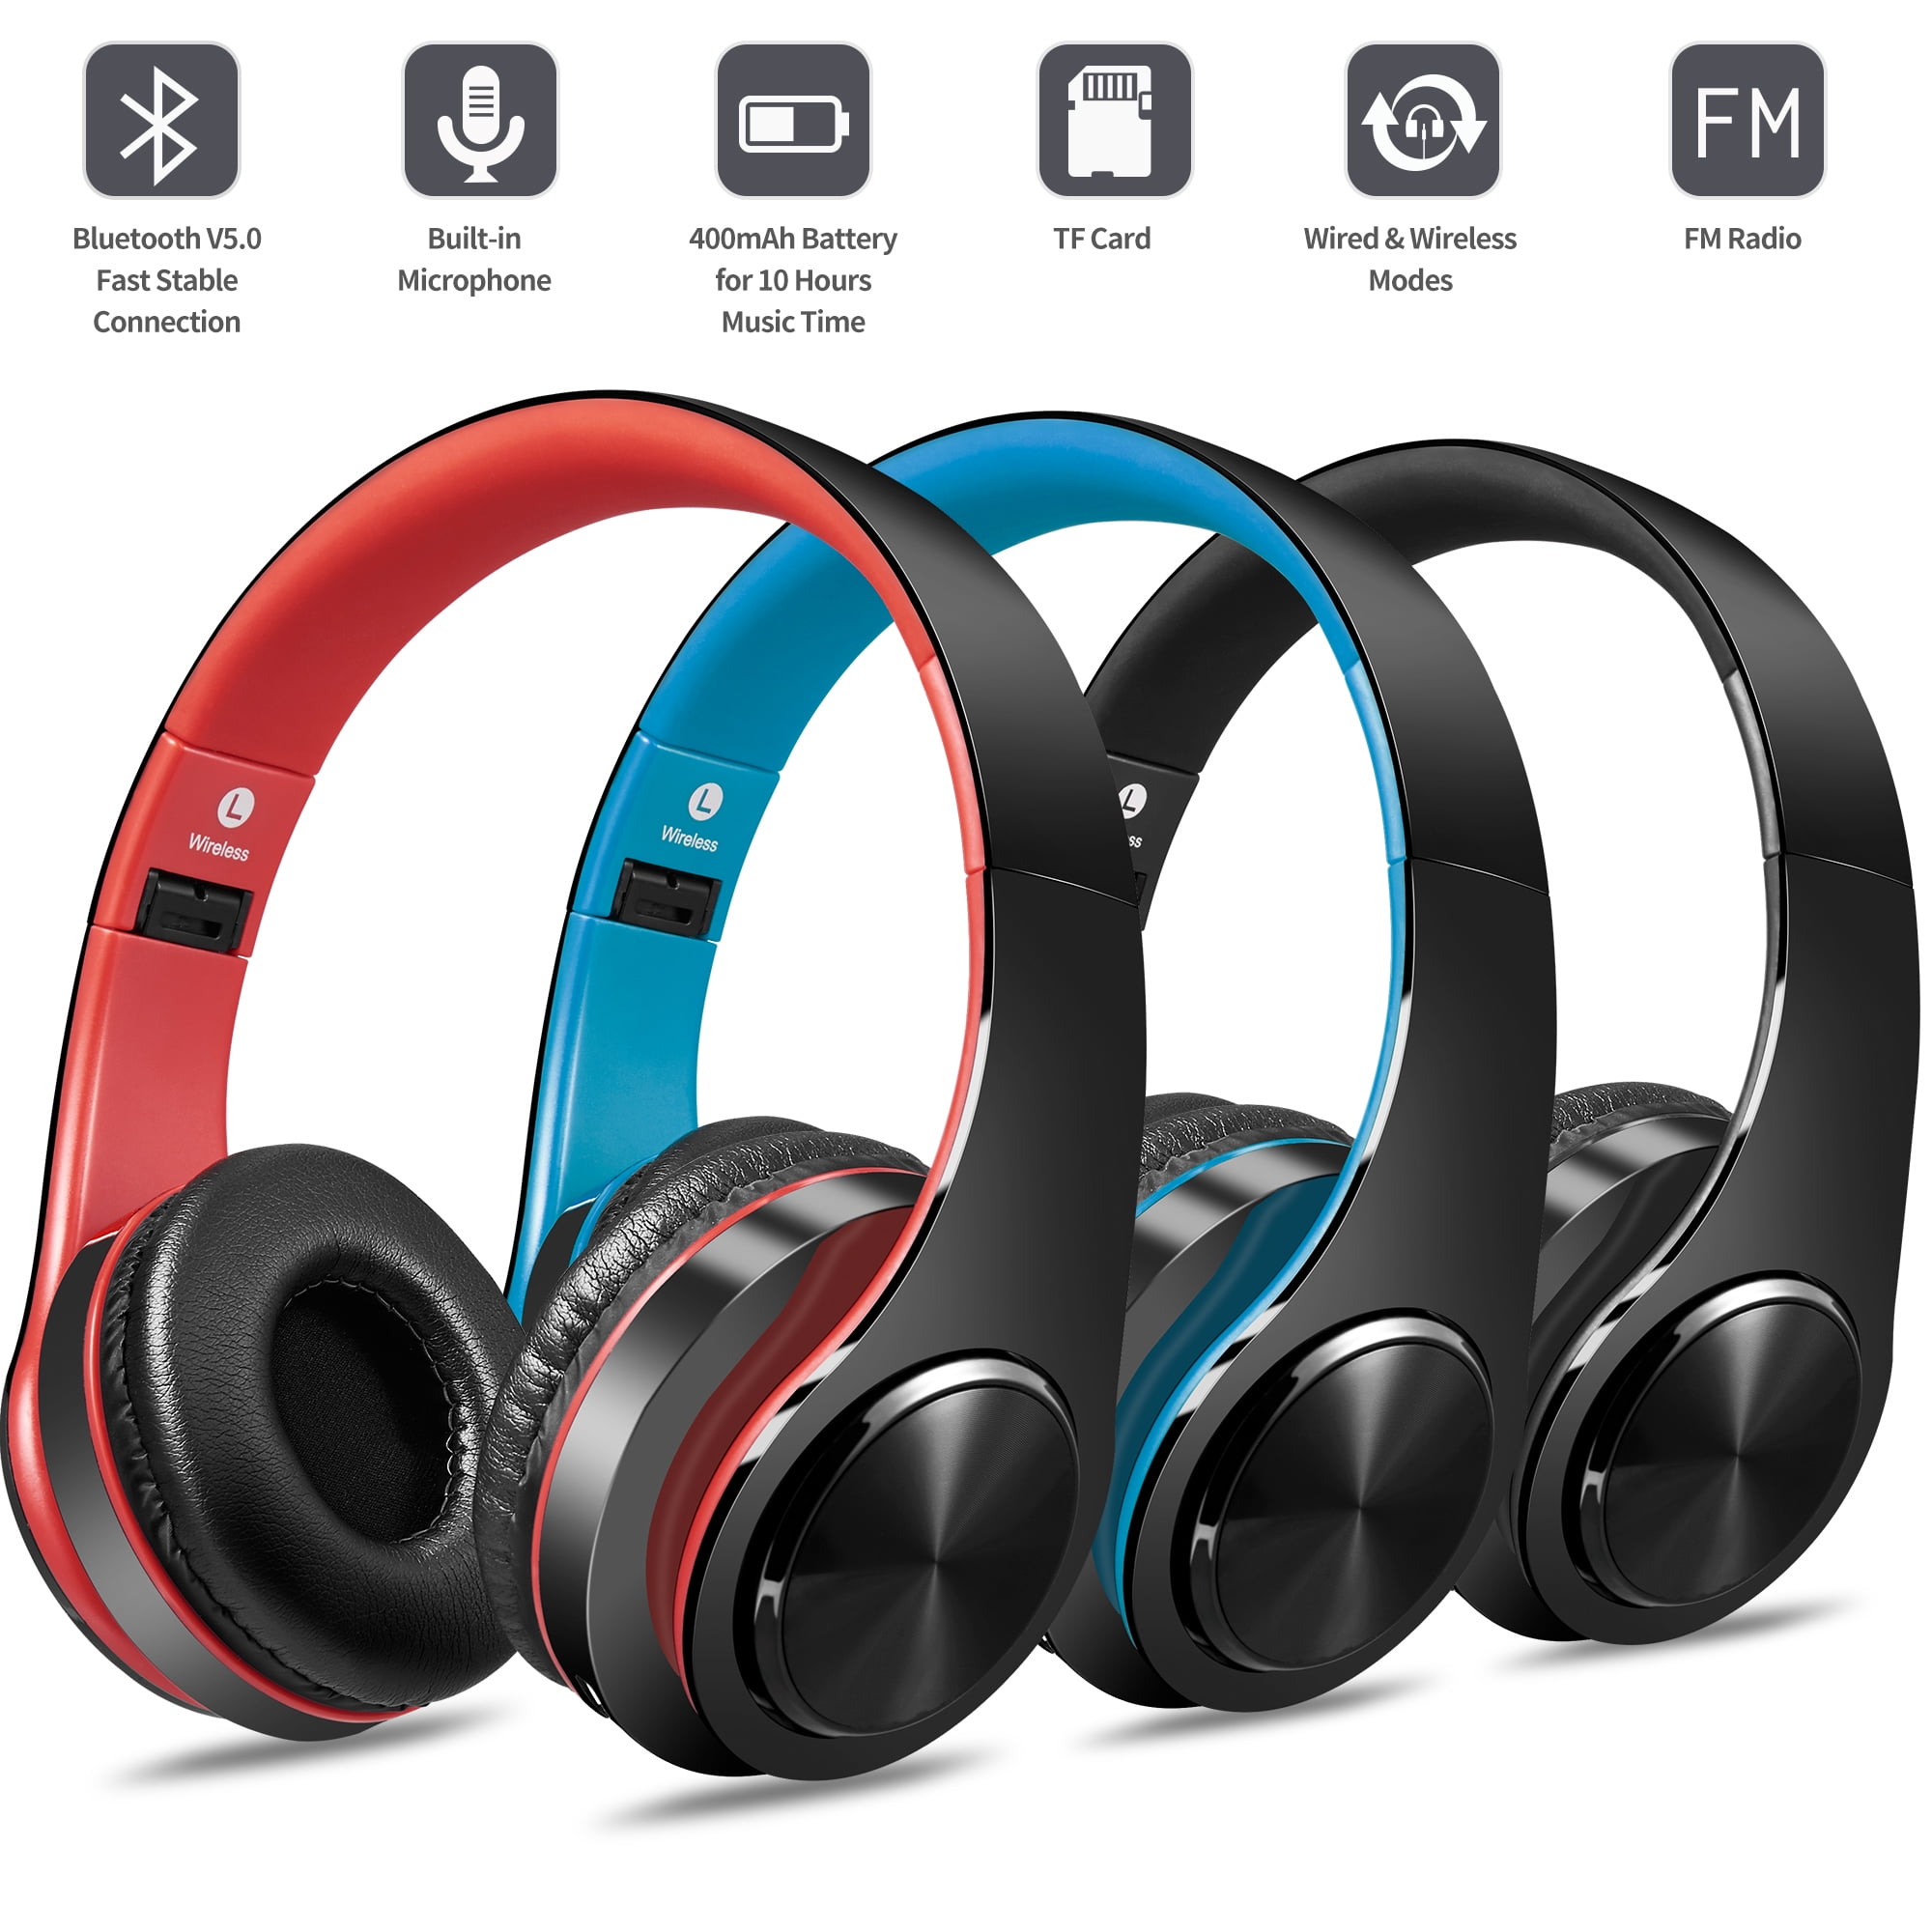 EXMAX Wireless Over Ear Headphone FM Stereo Headset Radio Bluetooth Music Receiver with Noise Reduction NRR 25dB Safety Earmuffs Hearing Protection Player with AUX Audio Cable Noise Canceling Headset